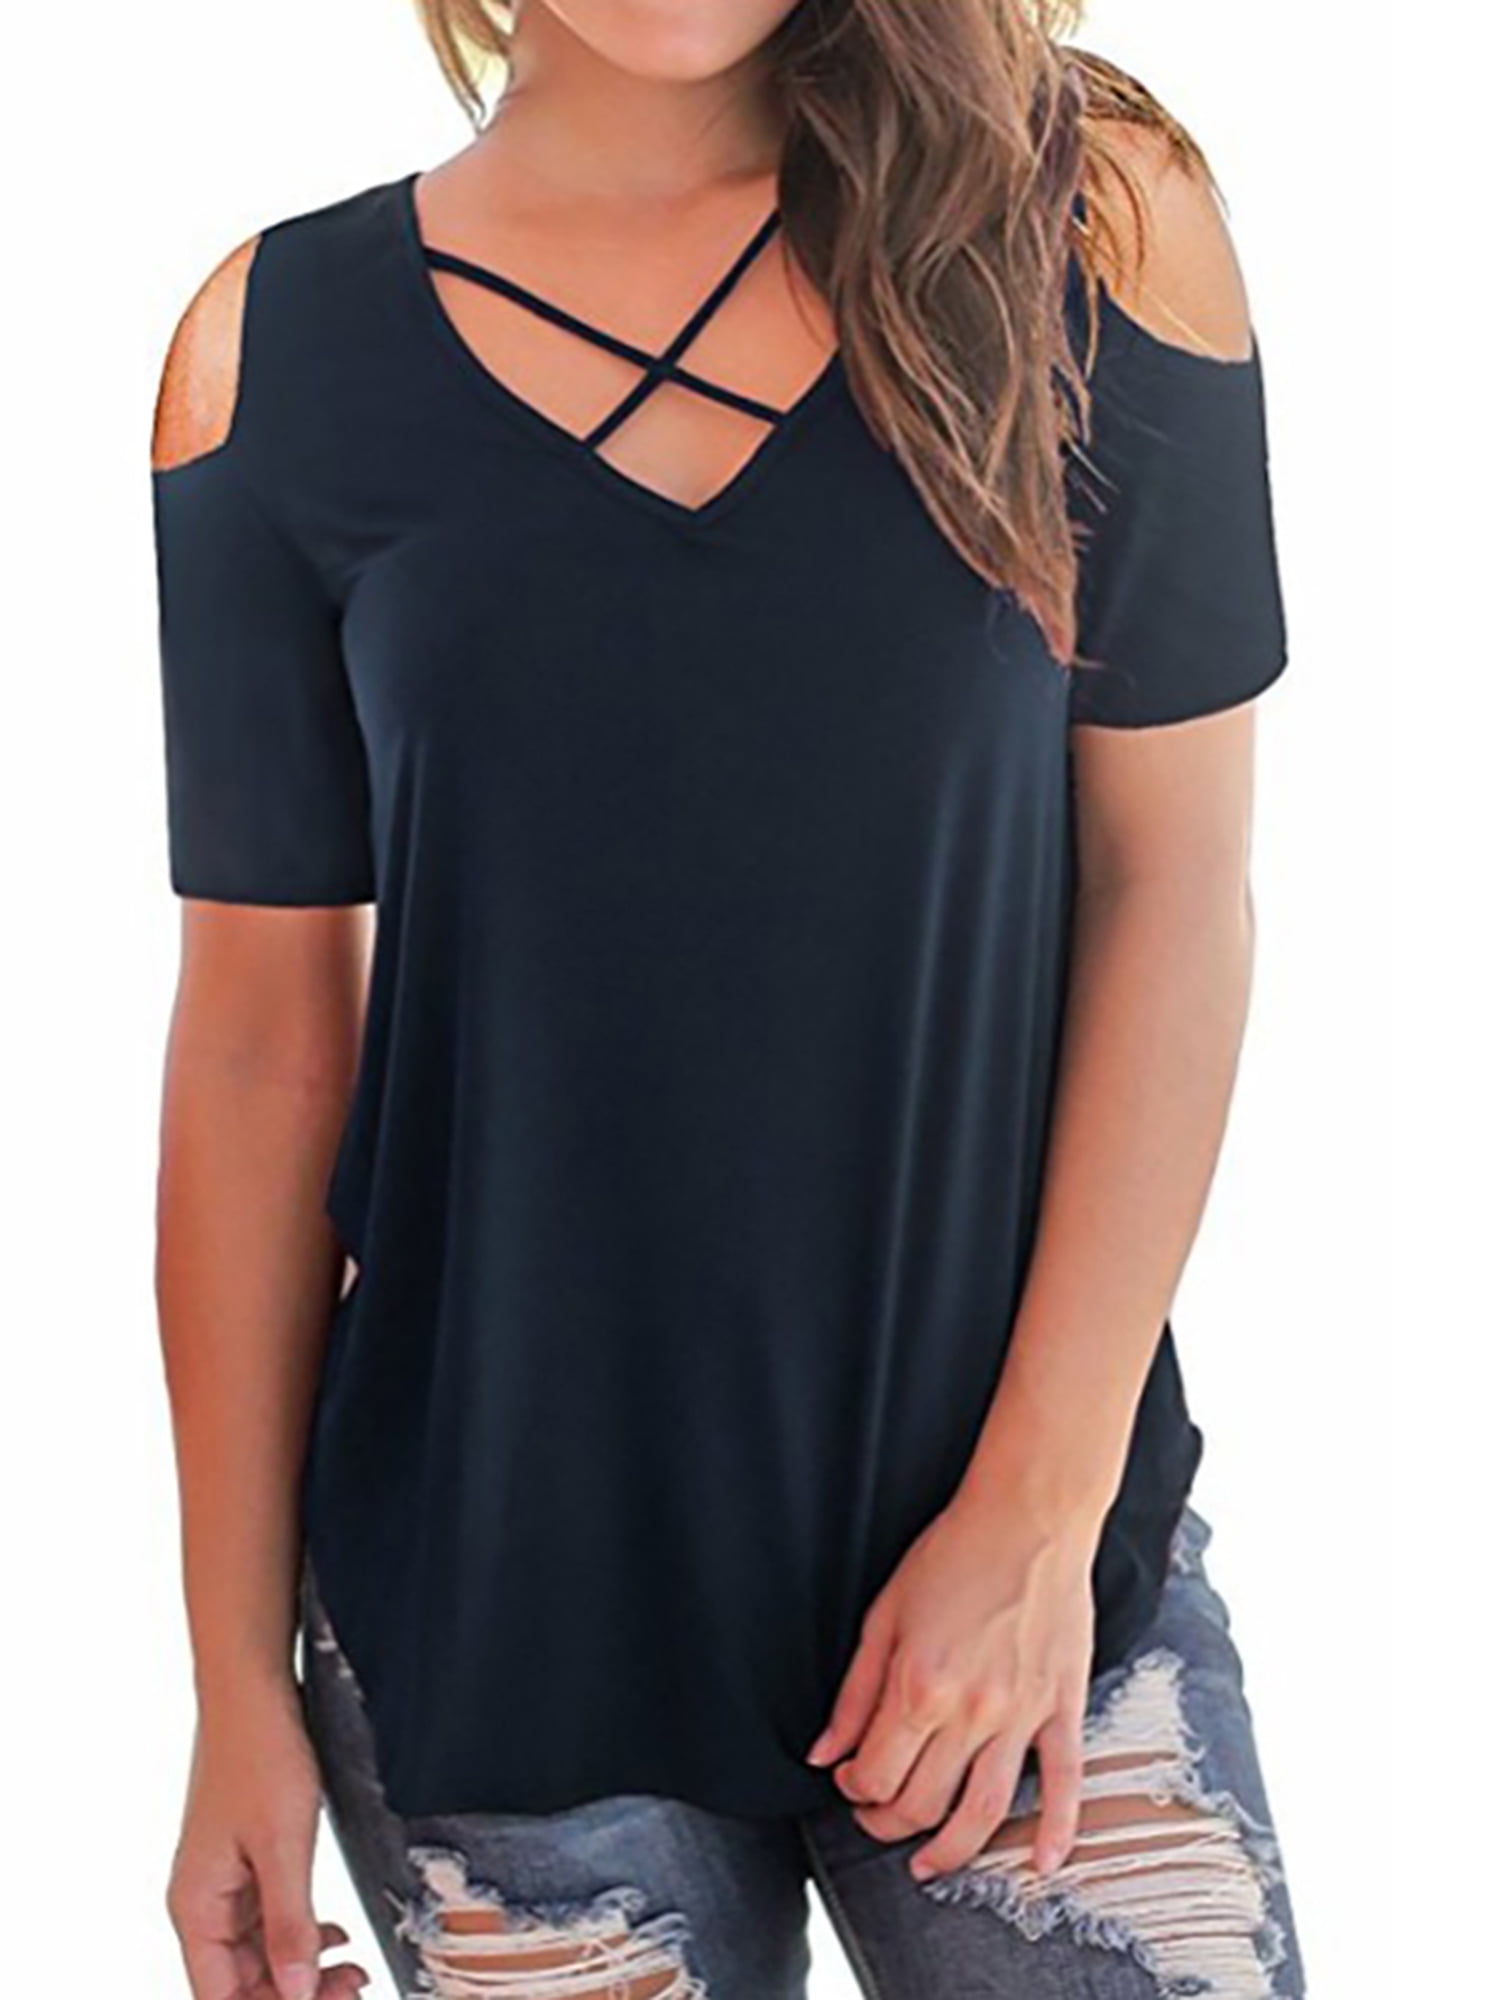 Eduavar Women Shirts Summer Short Sleeve T Shirts V Neck Tunic Roll Up Tops Cute Tees Loose Fitted Henley Workout Shirts 